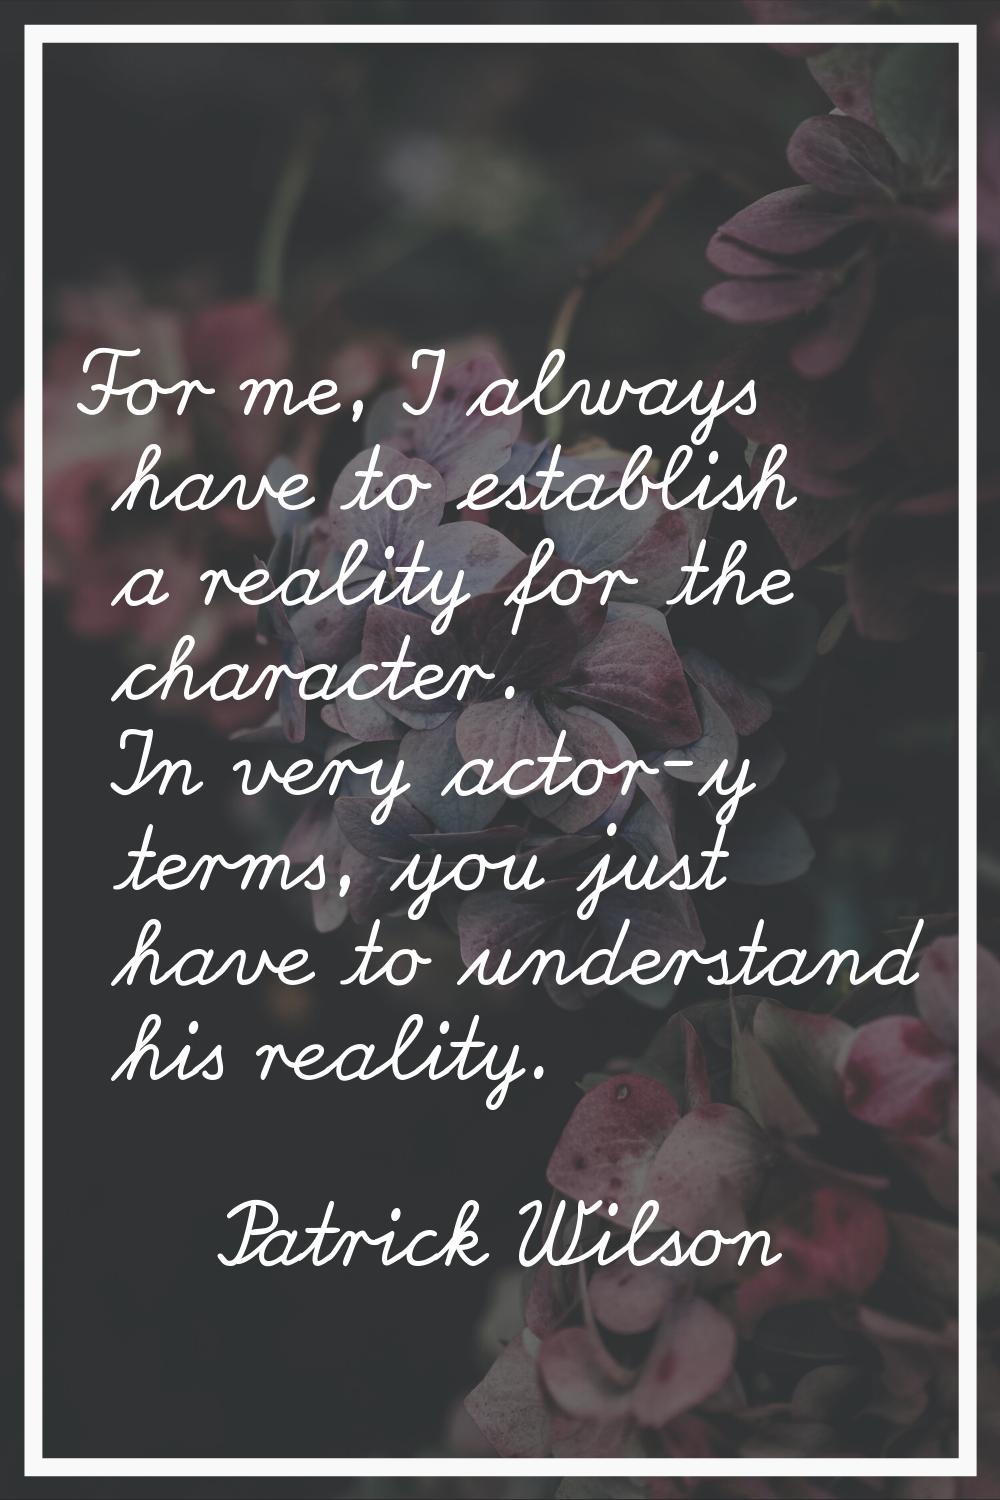 For me, I always have to establish a reality for the character. In very actor-y terms, you just hav